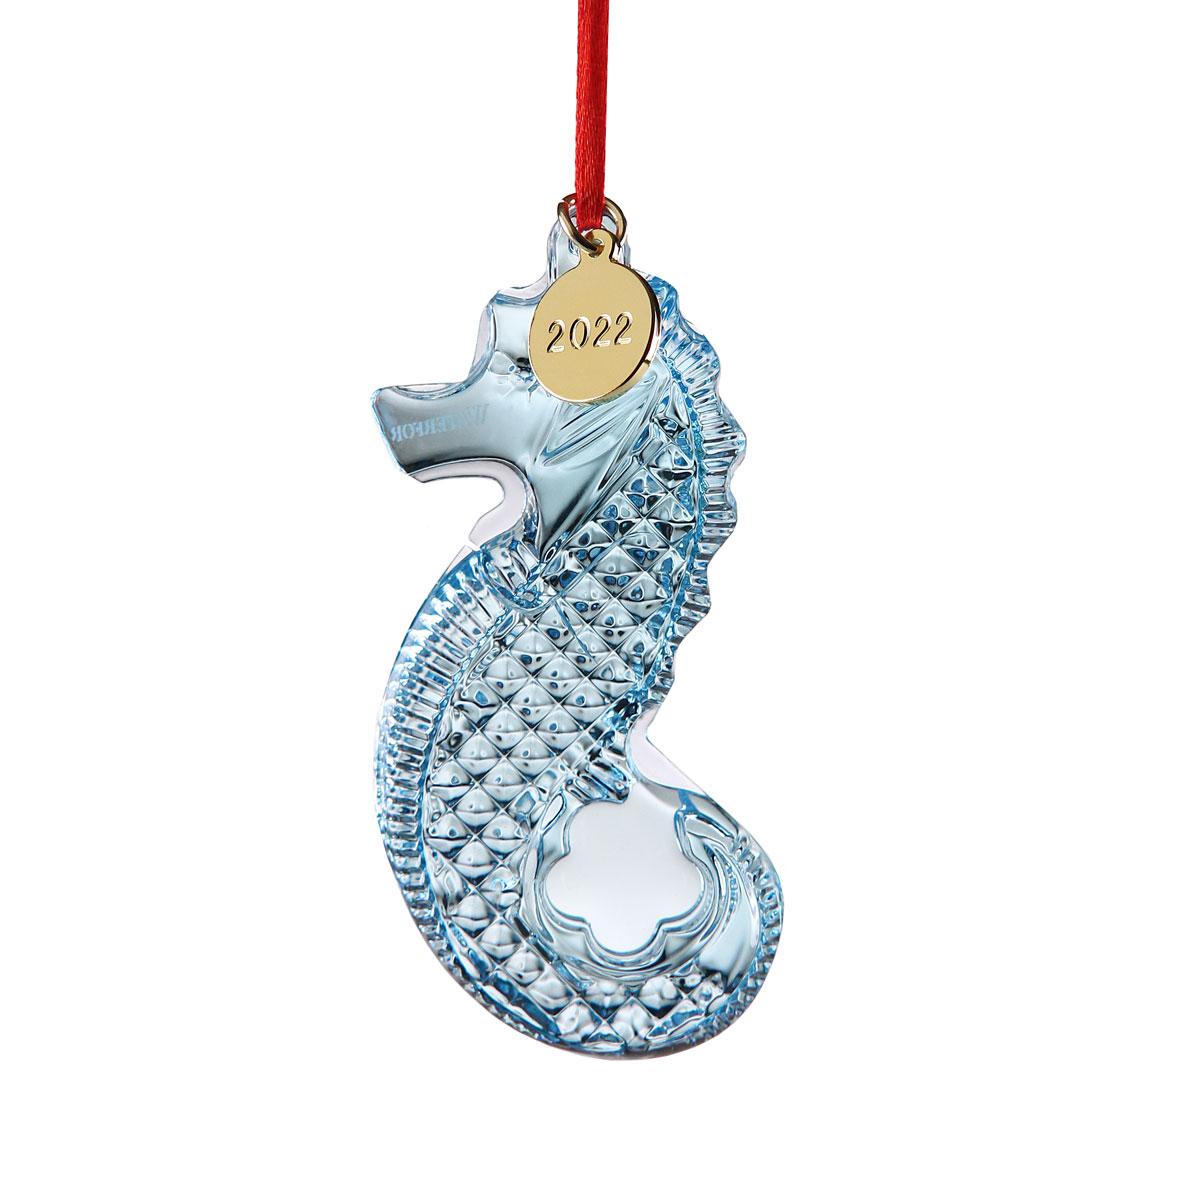 Waterford Crystal 2022 Seahorse Dated Ornament, Blue